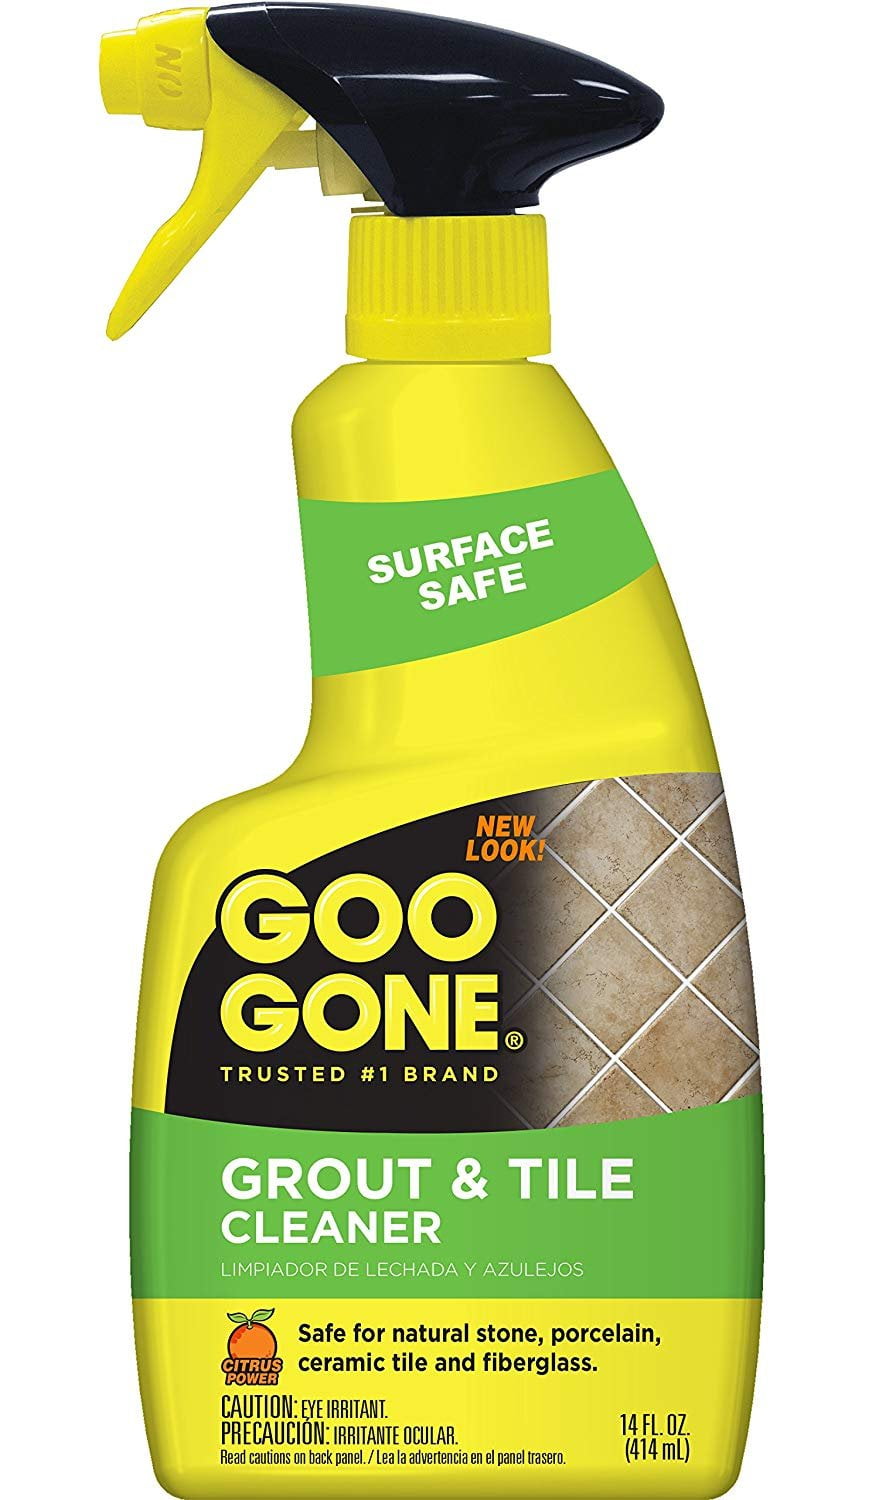 This Electric Grout Cleaner That Removes Old Stains Is on Sale